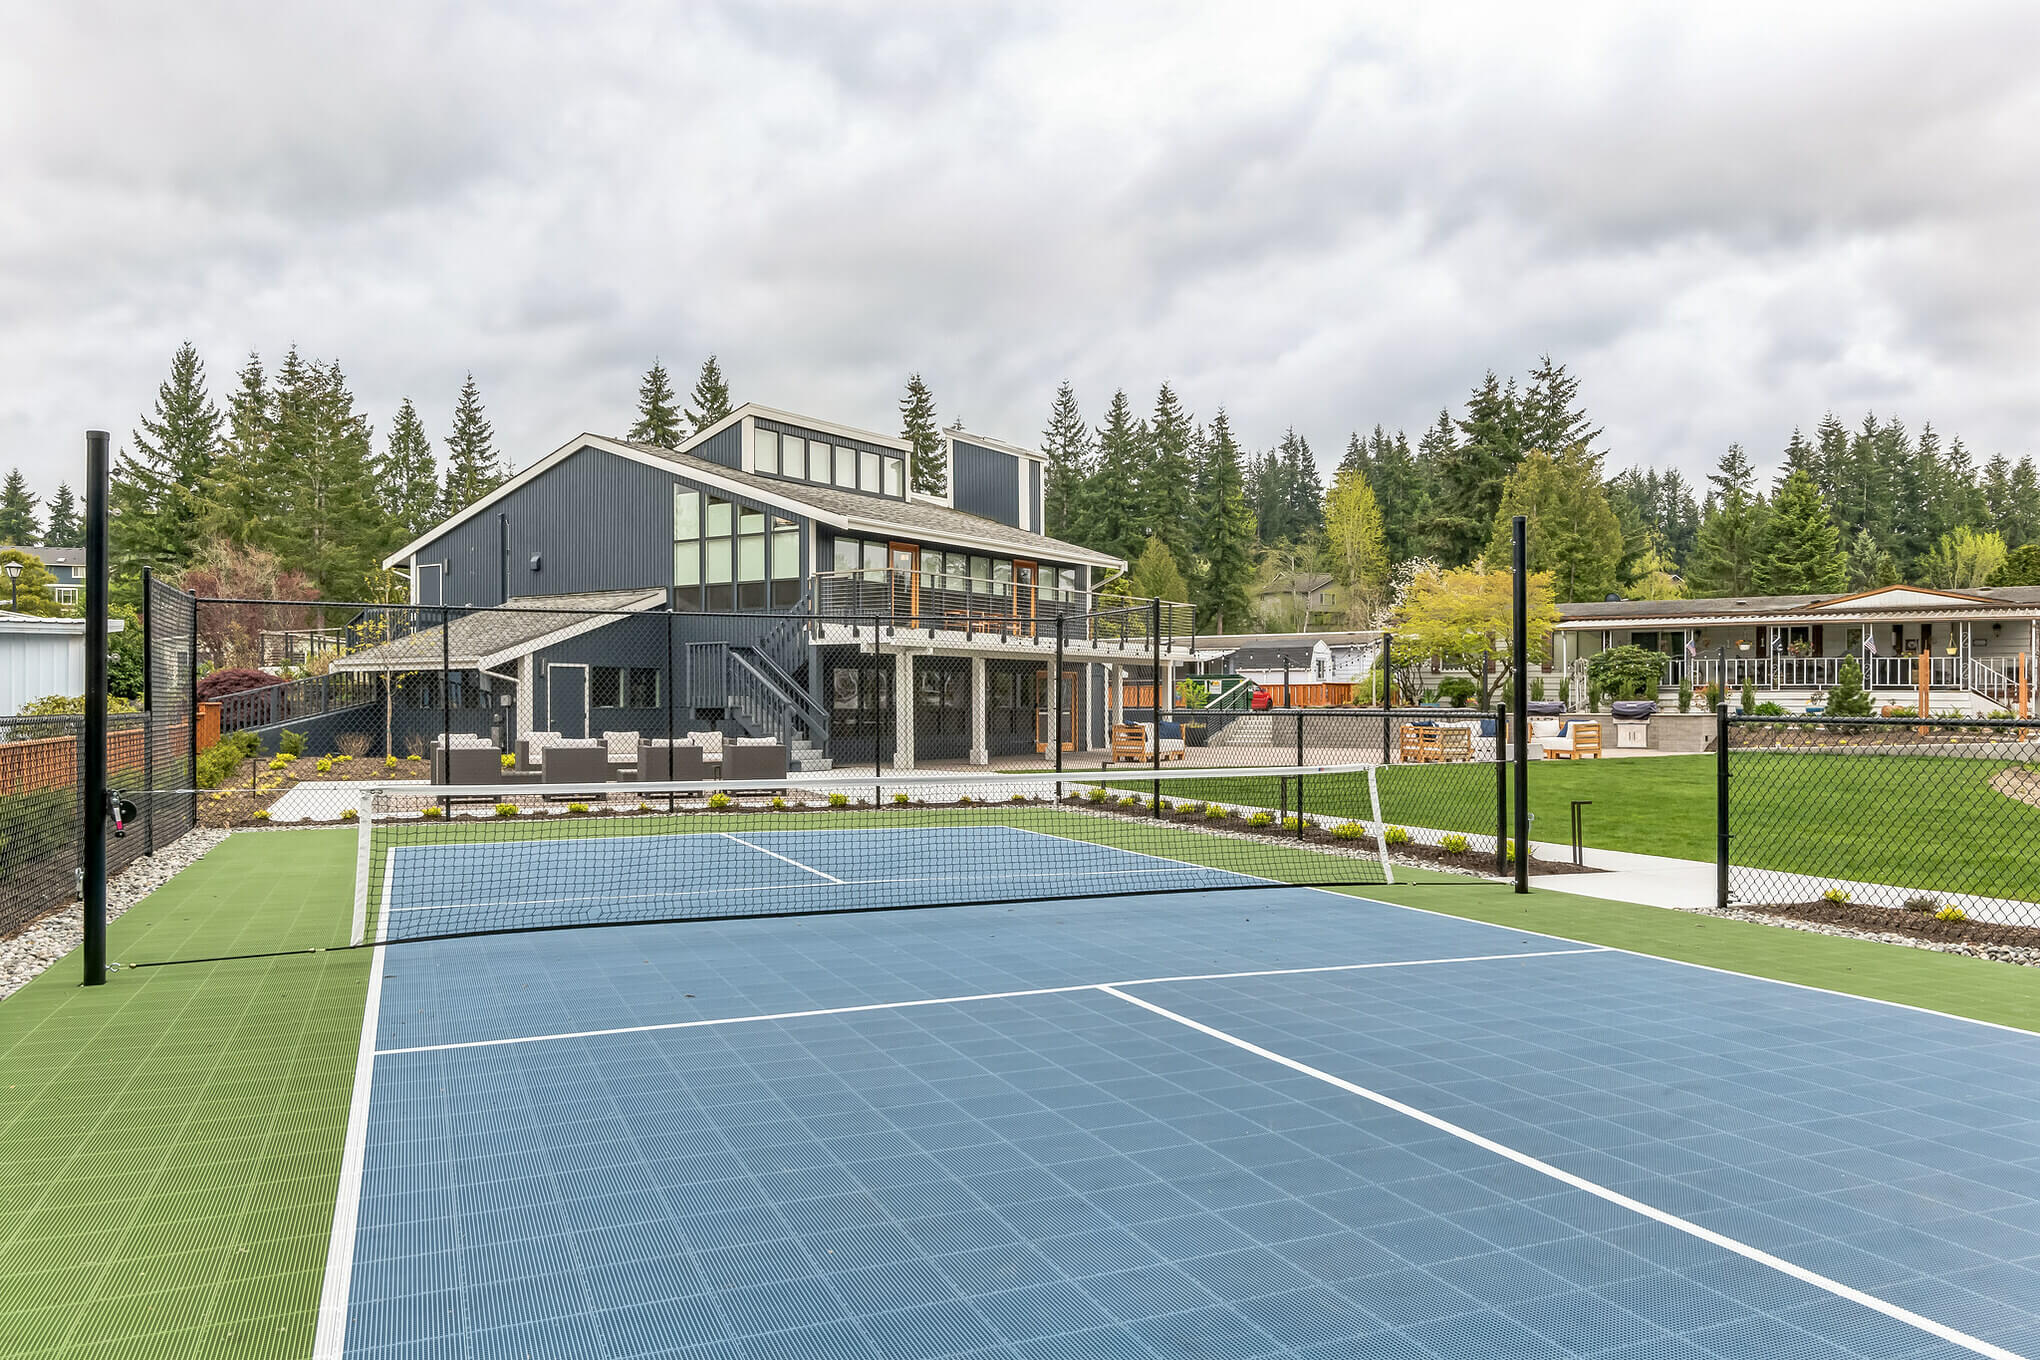 Manufactured home court for lawn tennis